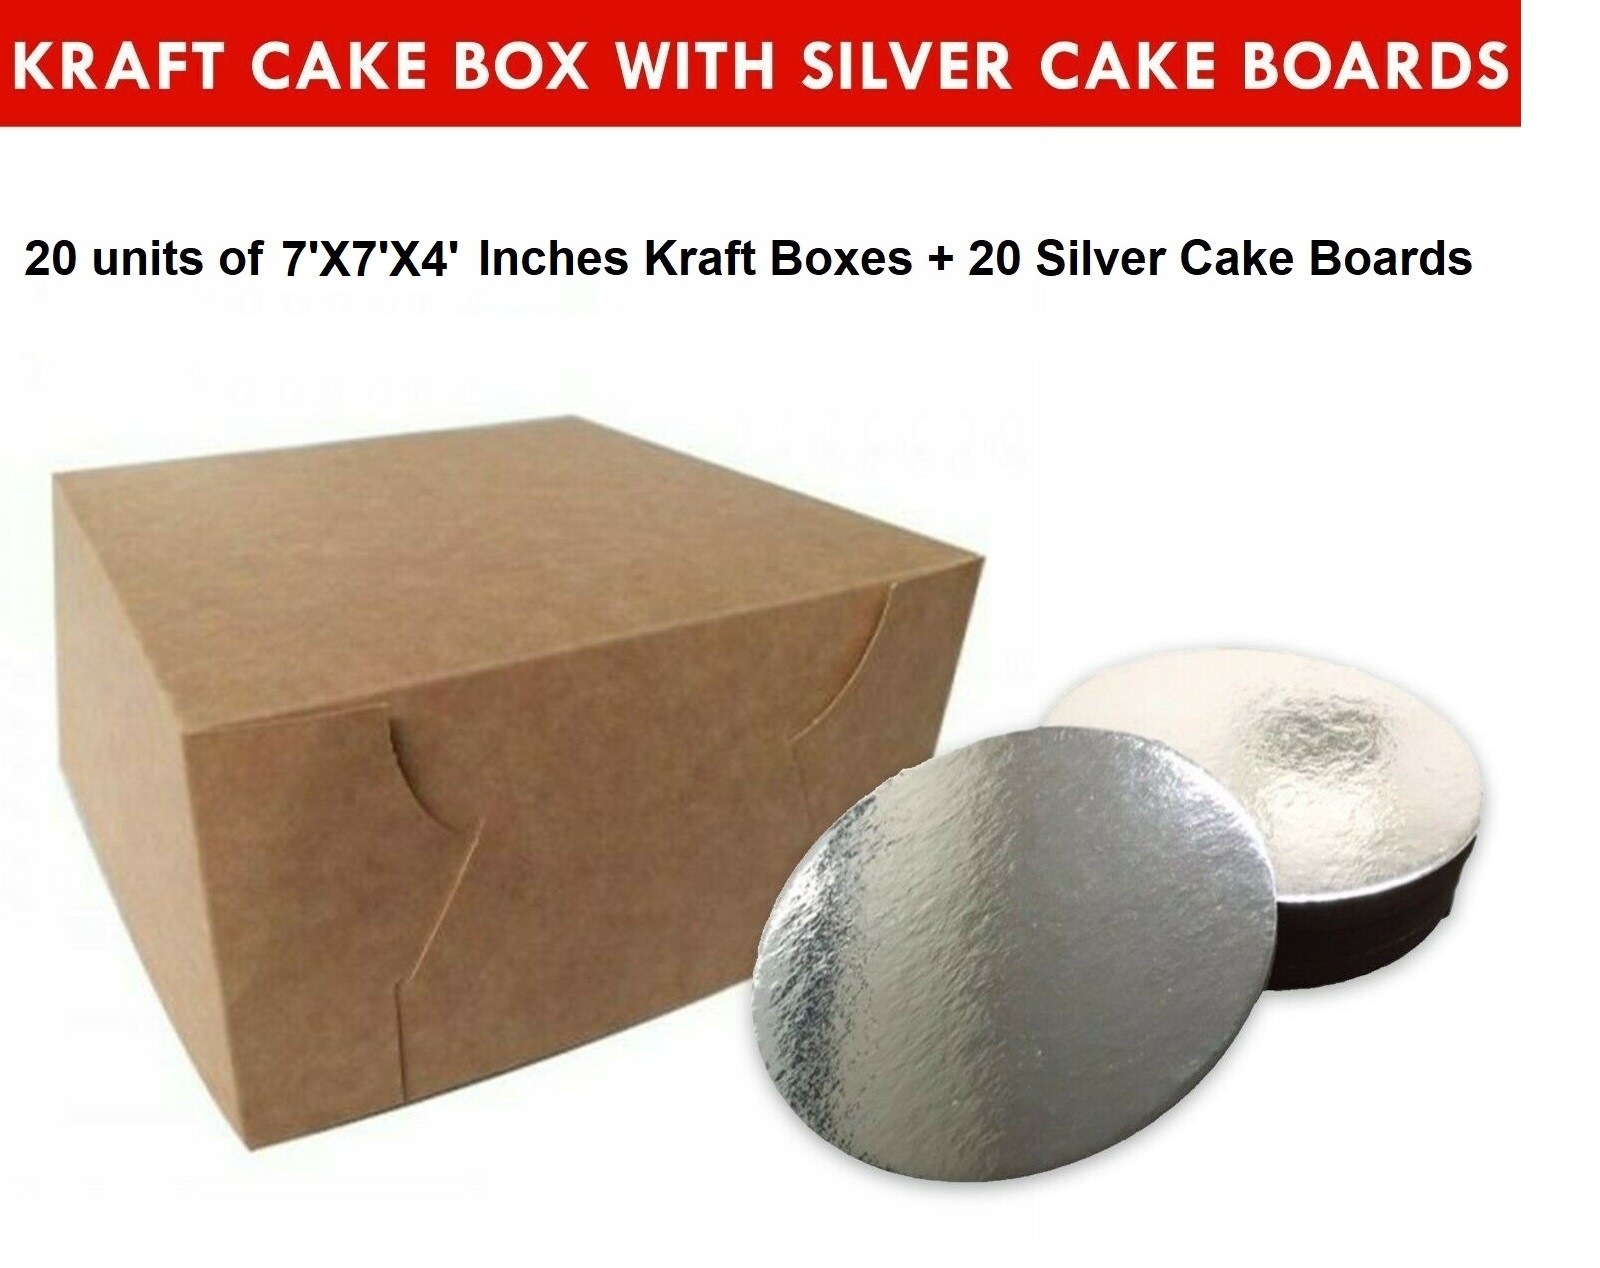 Kraft Cake Boxes with Round boards - 7" x 7" x 4" ($3.5 /pc x 20 units)